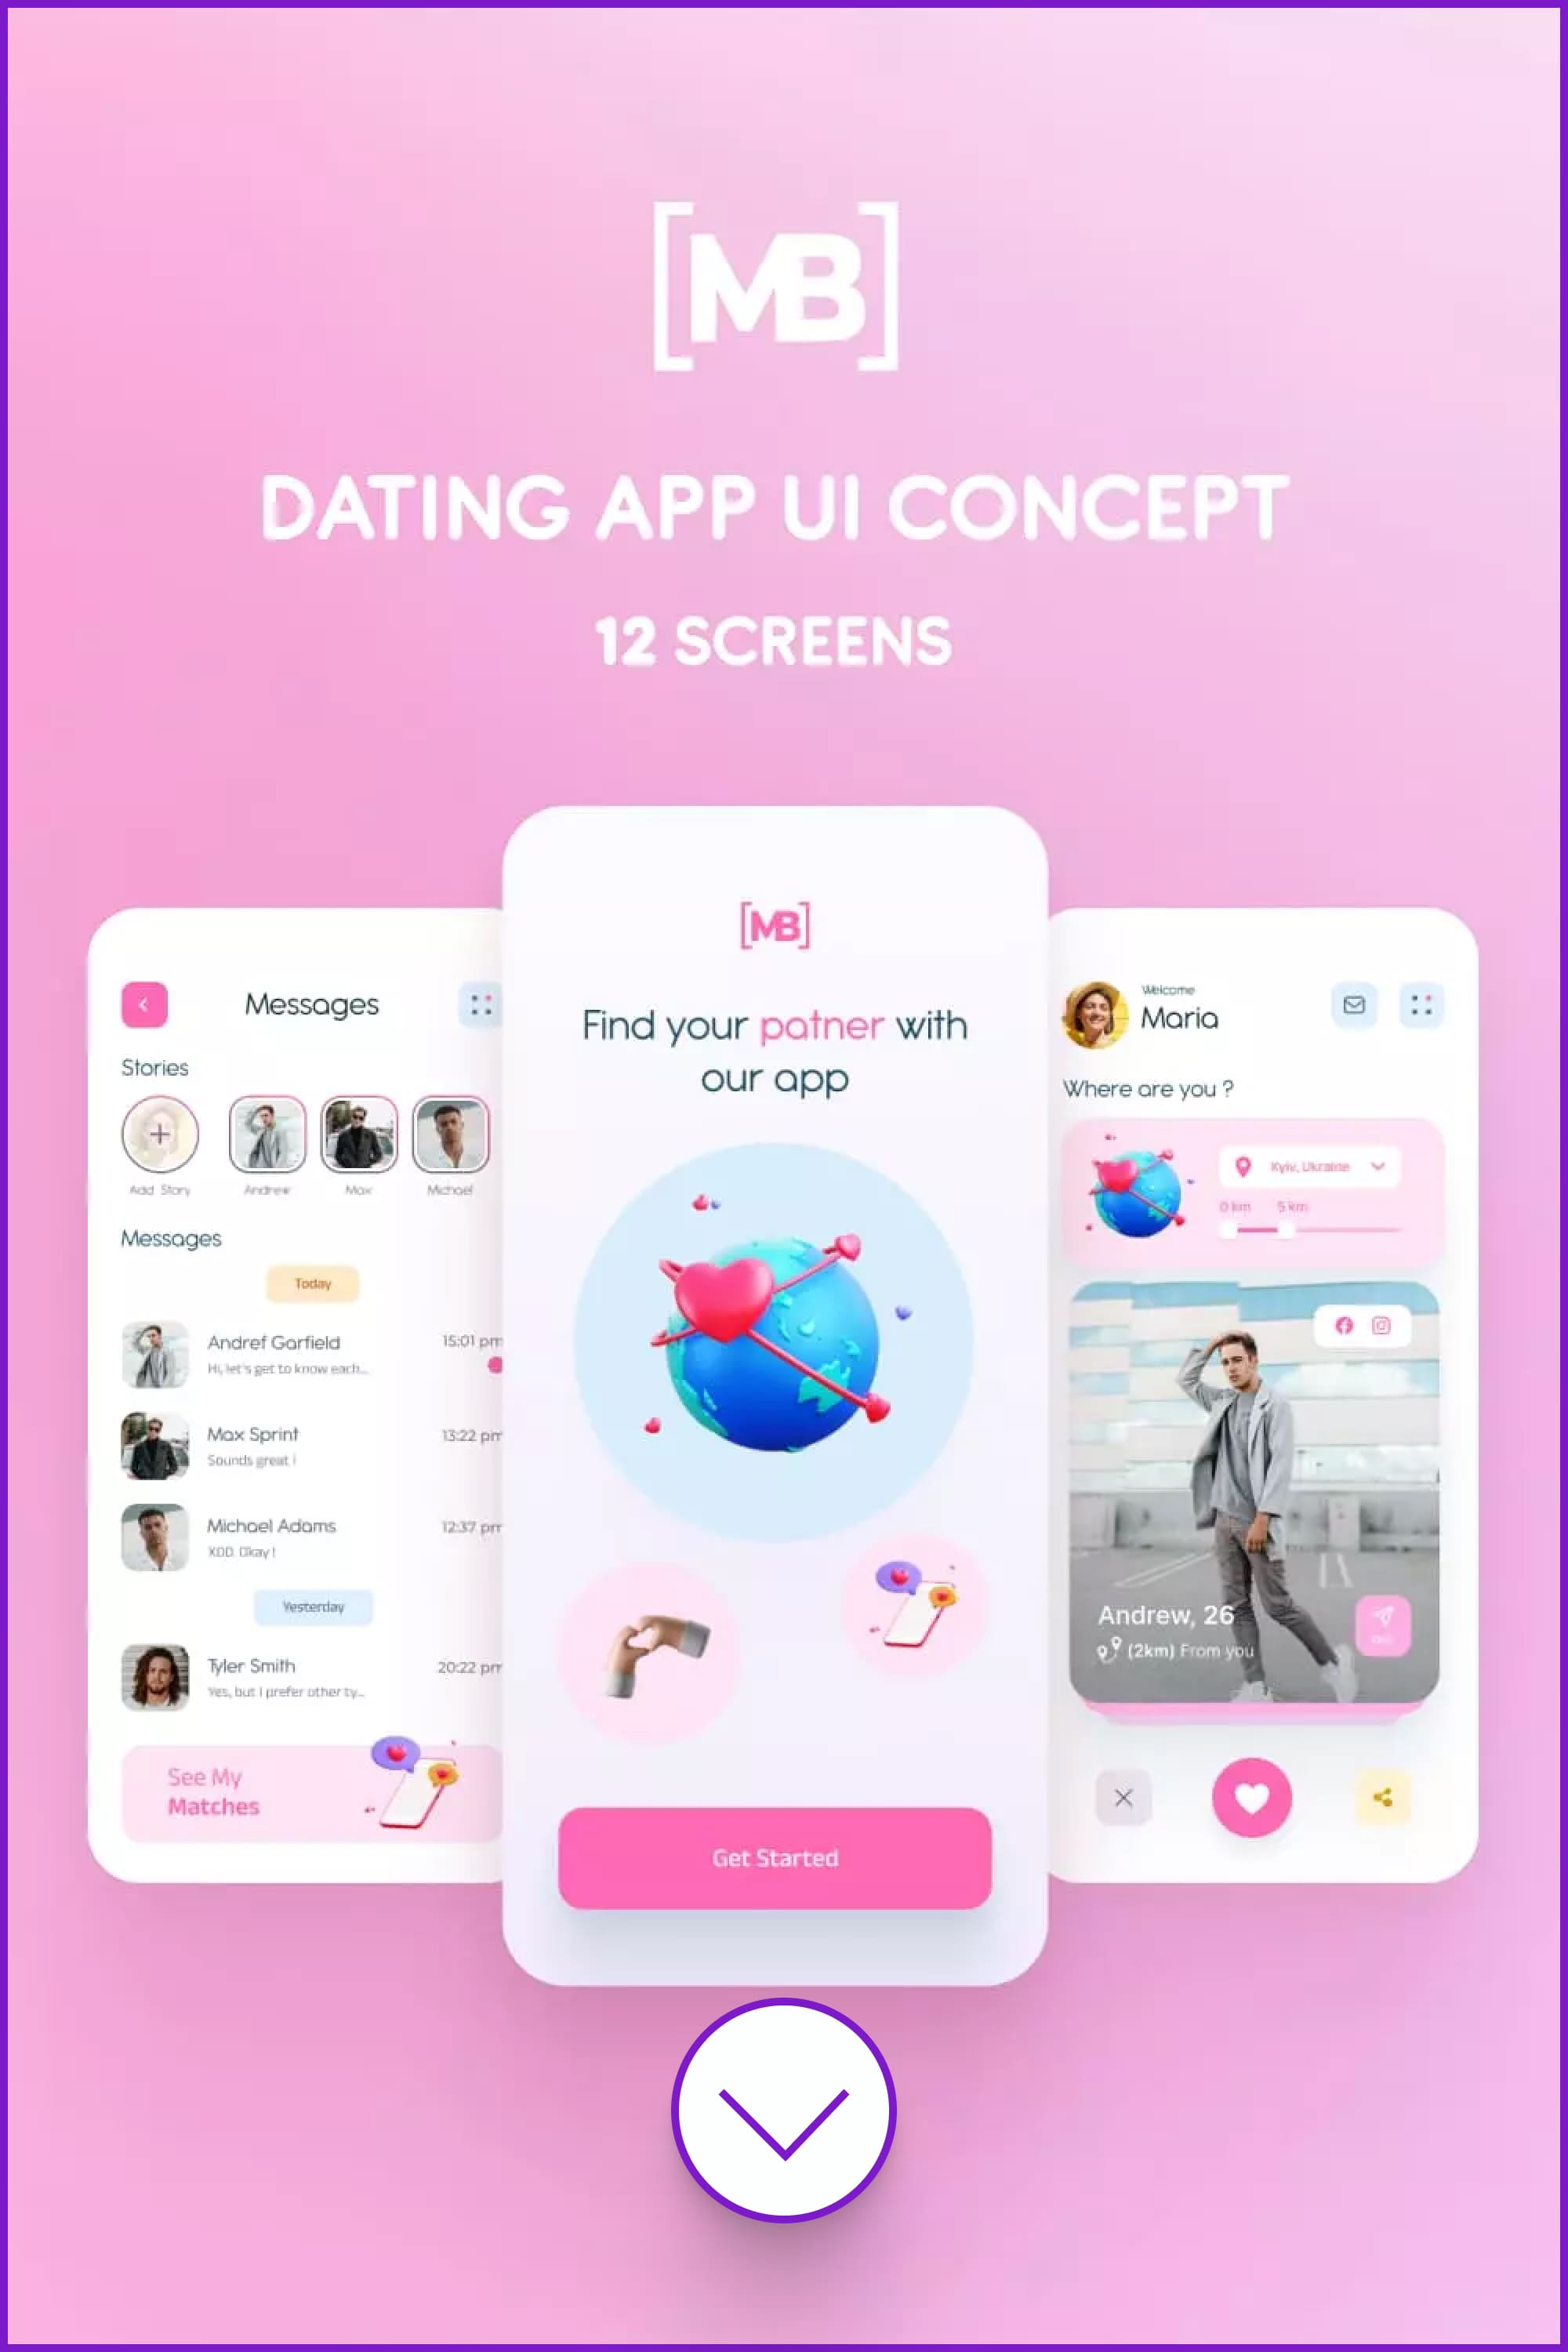 Screenshots of dating app in bright pink color.